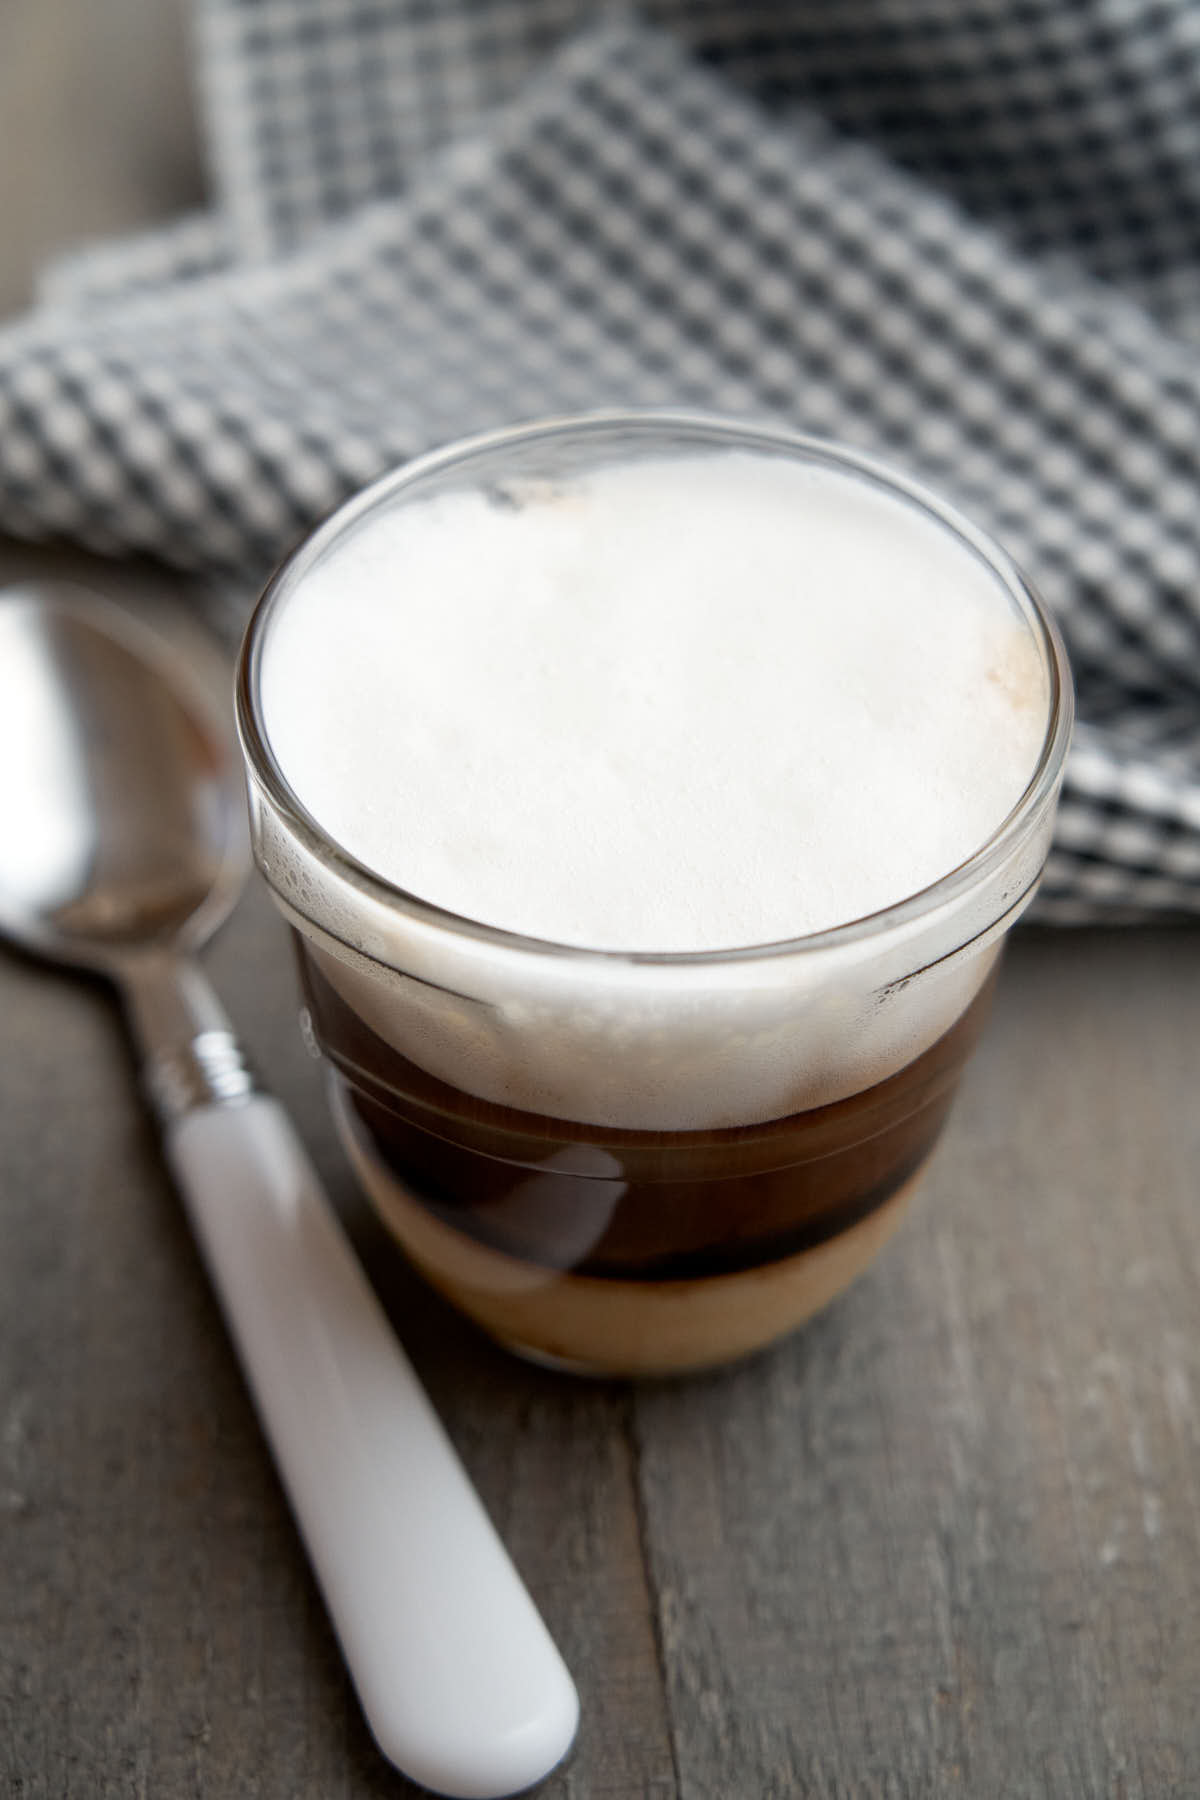 Espresso and condensed milk drink - glass cup to show layers